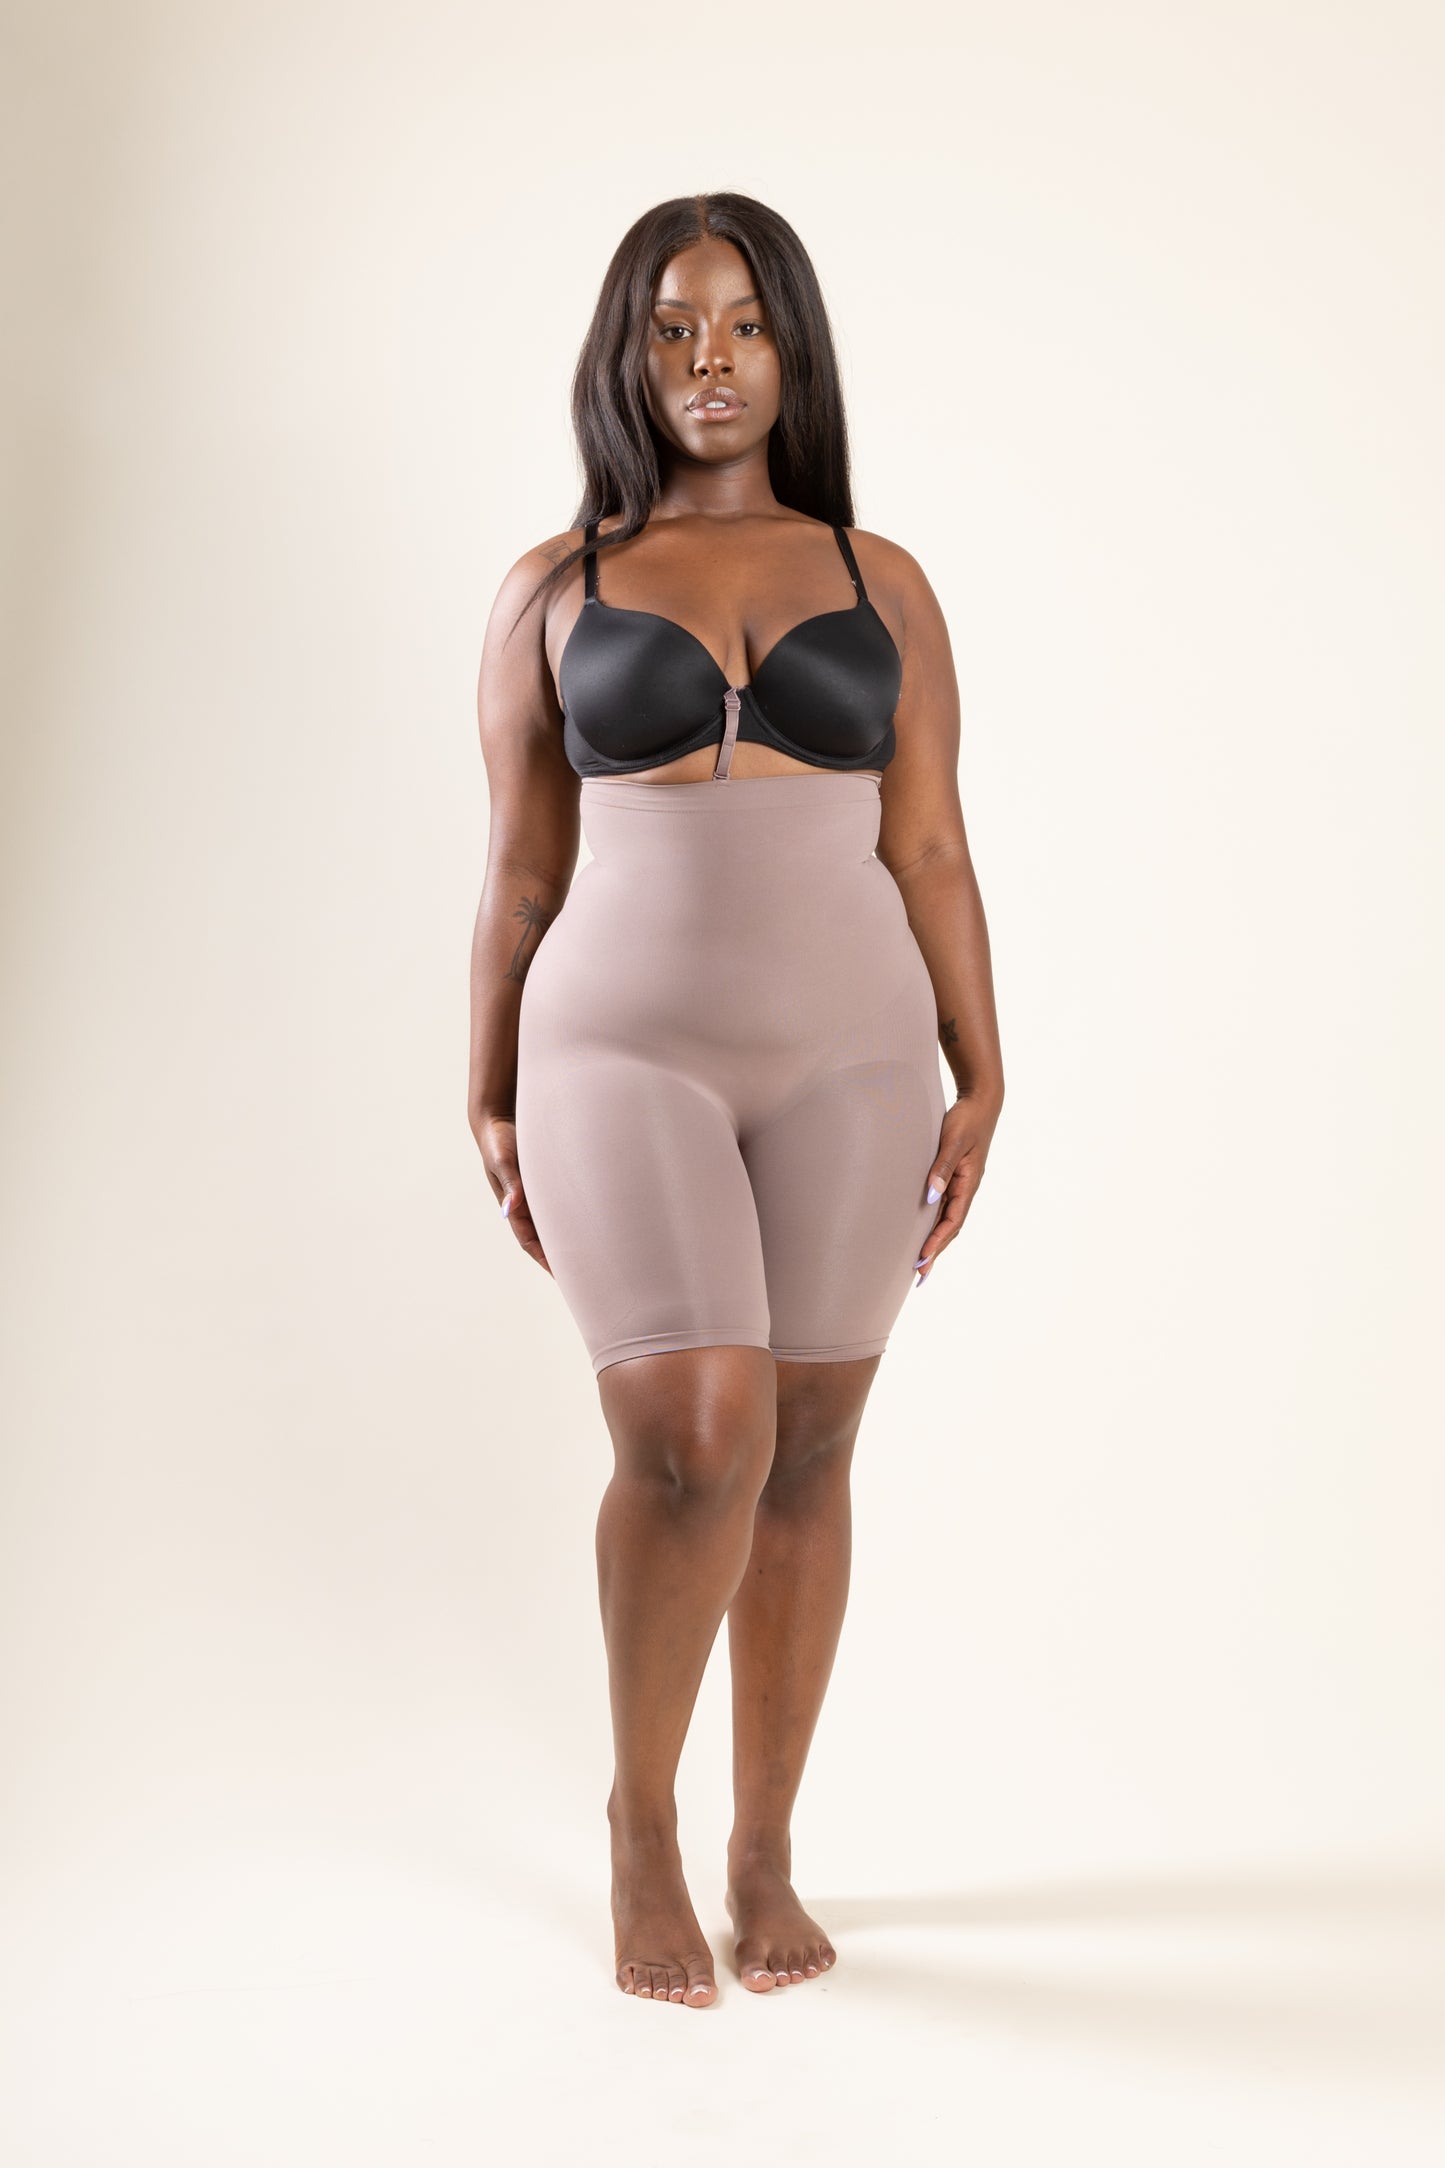 Hanes all over solutions women's Shapewear smooth fit, full body nude NEW  Sz 36D - $46 New With Tags - From Earlisha